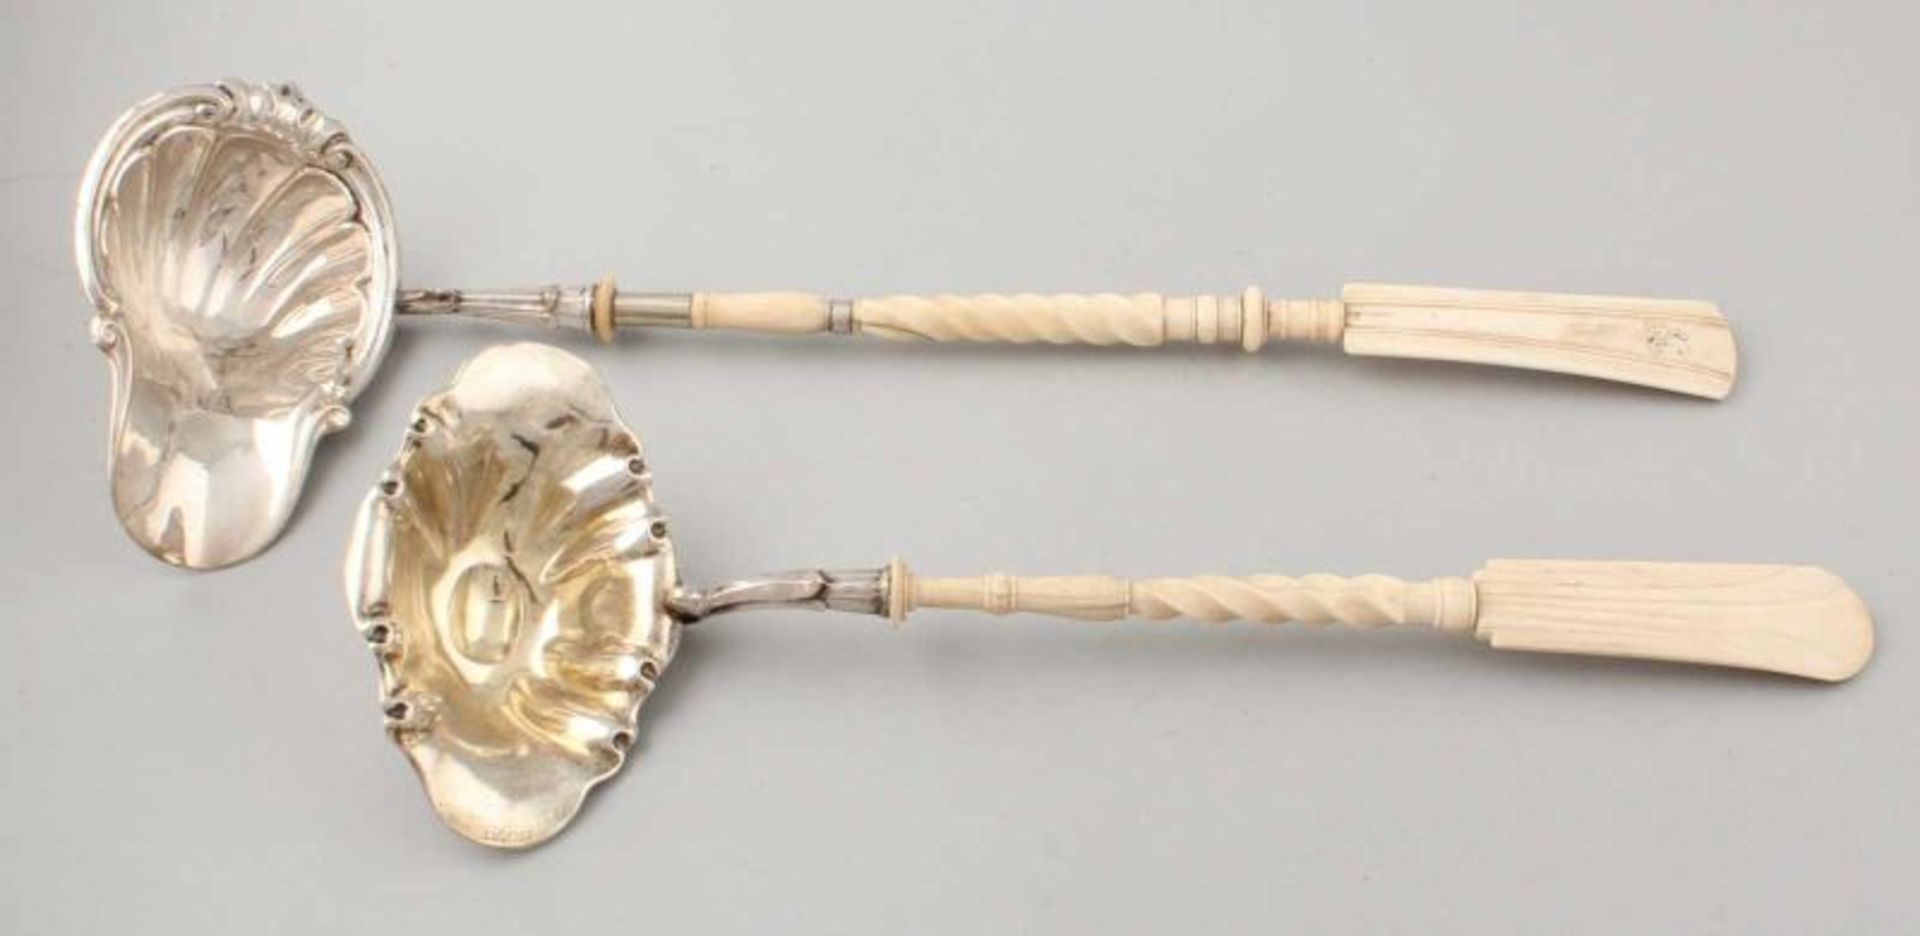 Two serving spoons, one silver with bush-shaped contoured bowl and ivory machined steel, 35x12 cm,